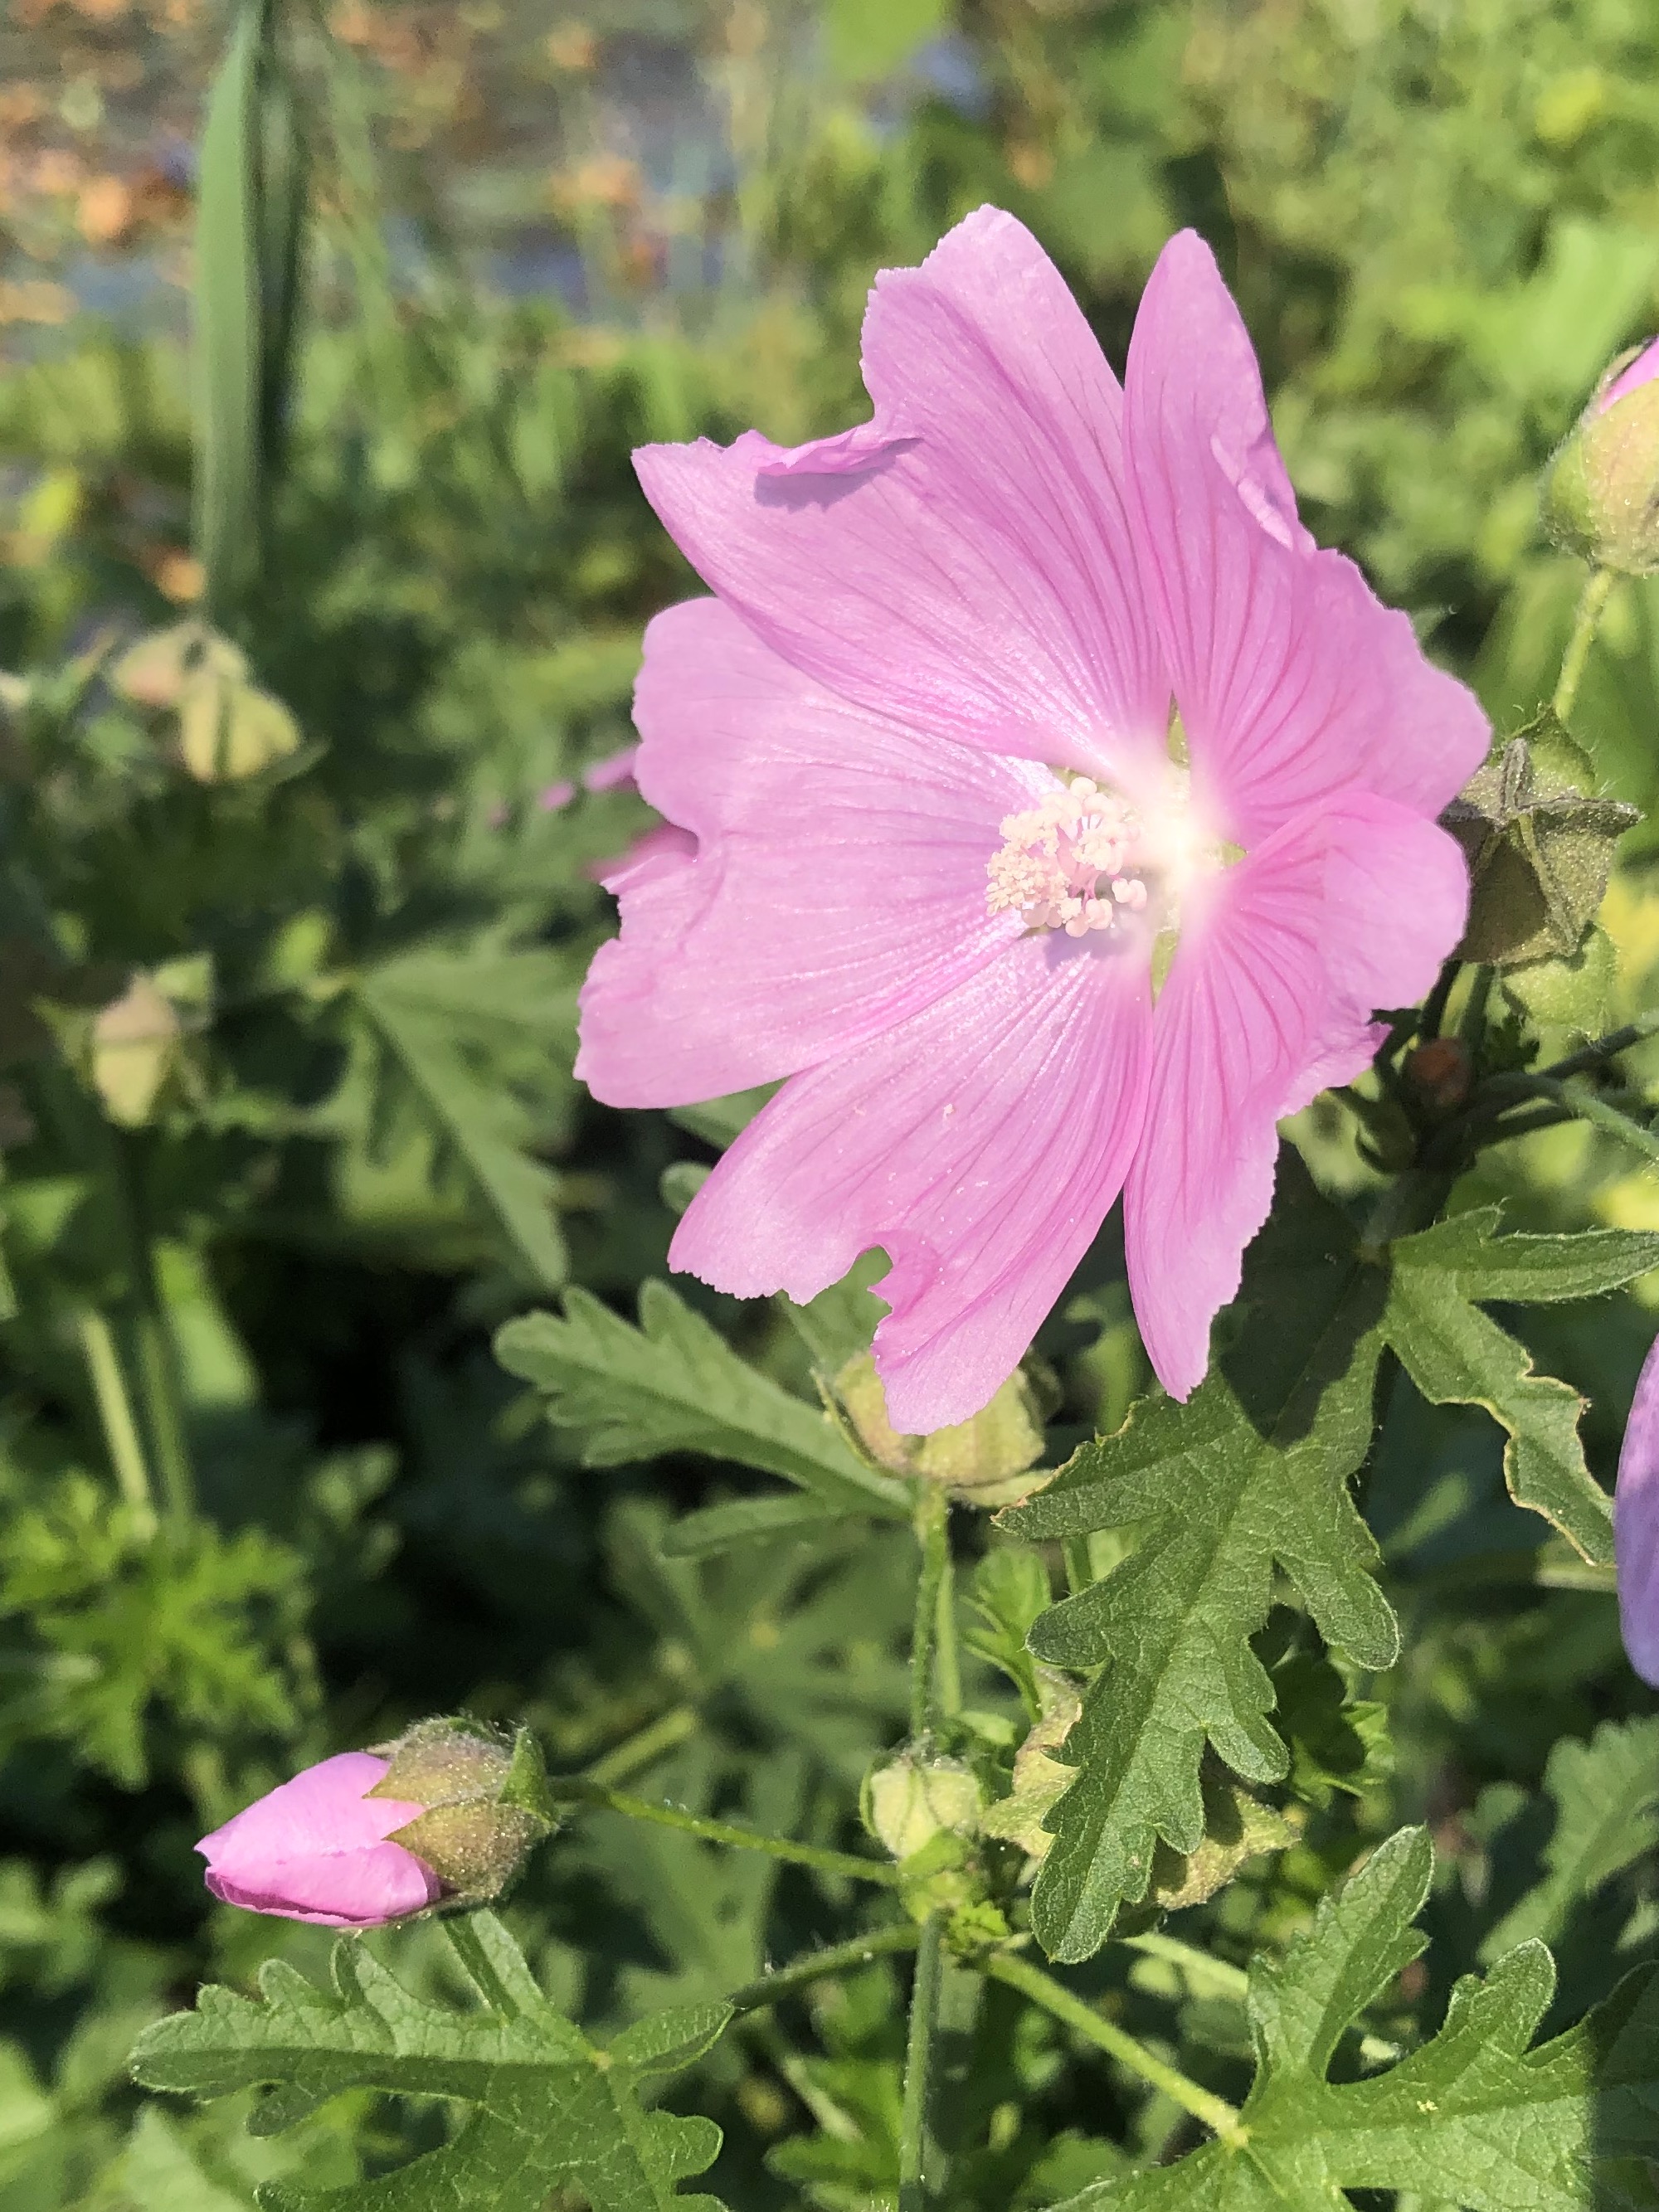 Vervain Mallow on the shore of Lake Wingra in Vilas Park in Madison, Wisconsin on September 10, 2021.